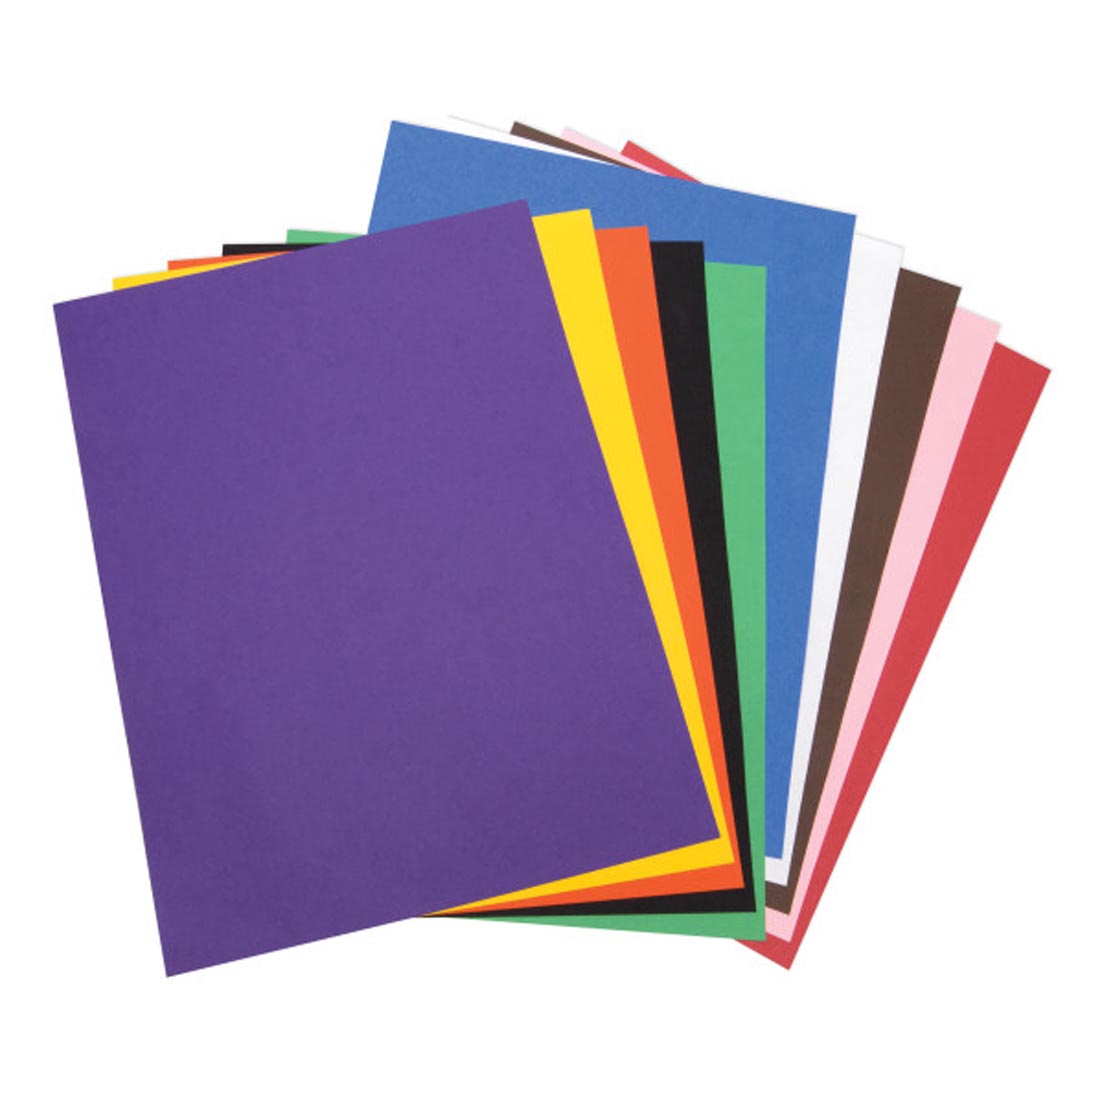 Tru-Ray Super Heavyweight Fade-Resistant 24x36" Sulphite Construction Paper Color Pack